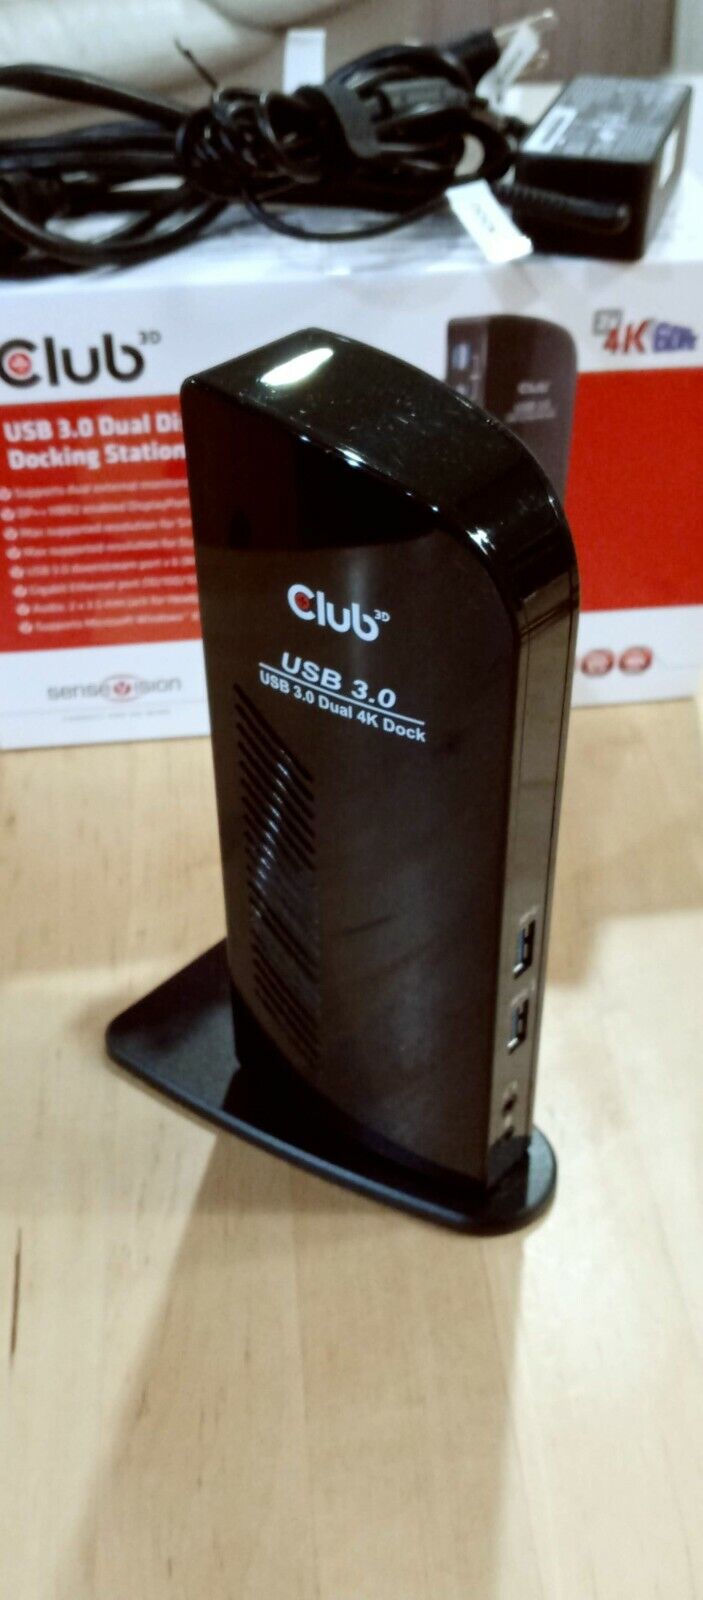 Club3D USB 3.0 4K Dock, in perfect working condition